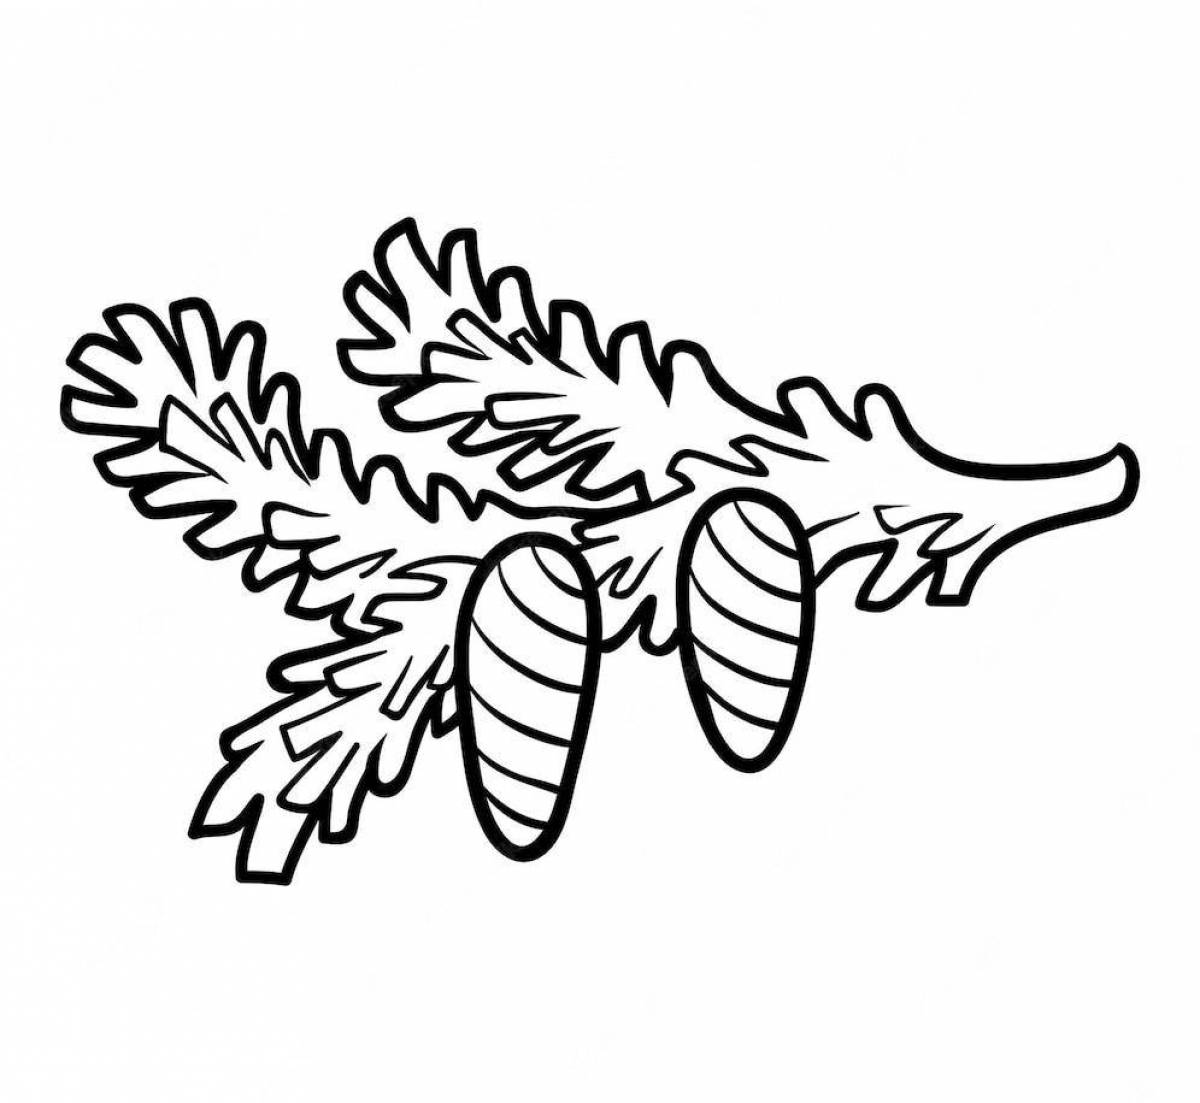 Coloring page cheerful spruce twig